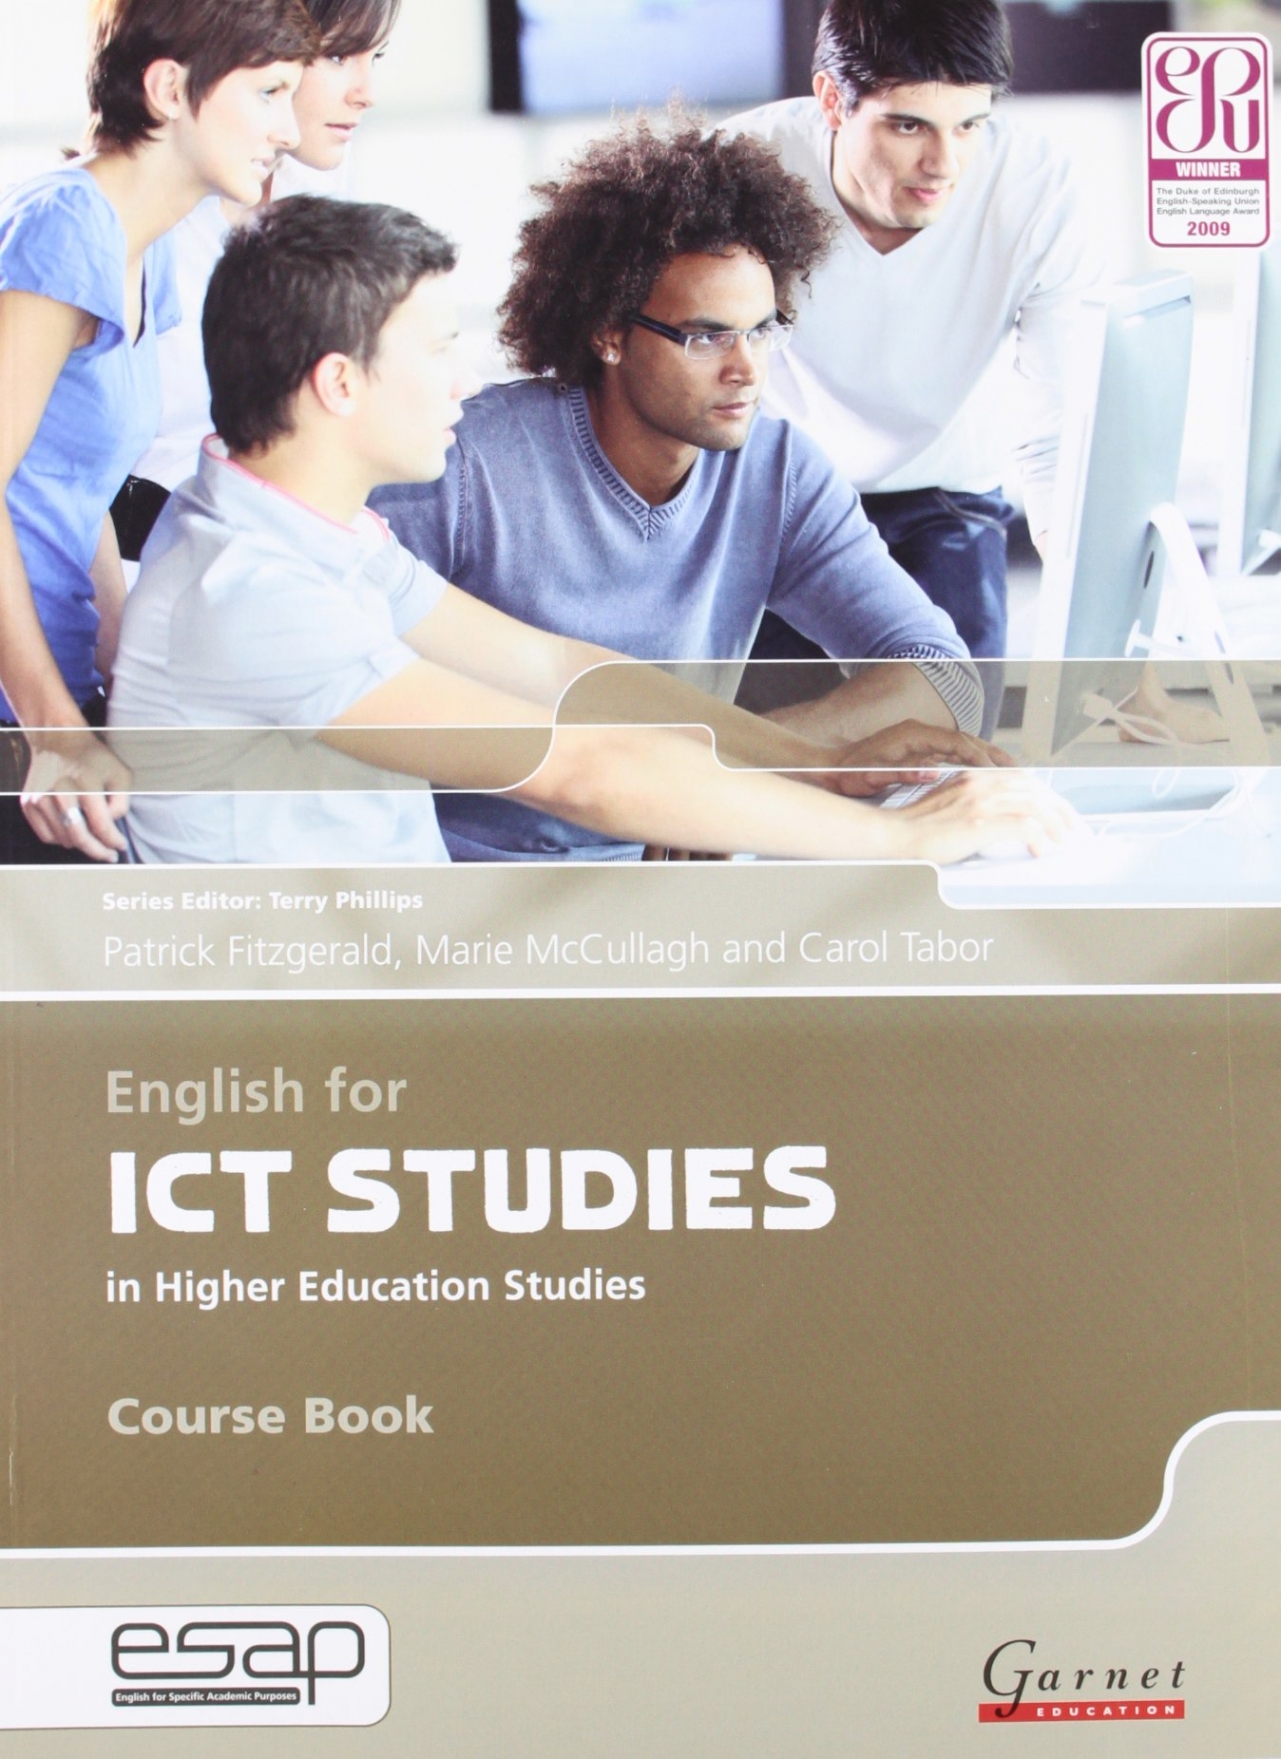 FitzGerald, Marie, Patrick; McCullagh English for ICT Studies in Higher Education Studies 